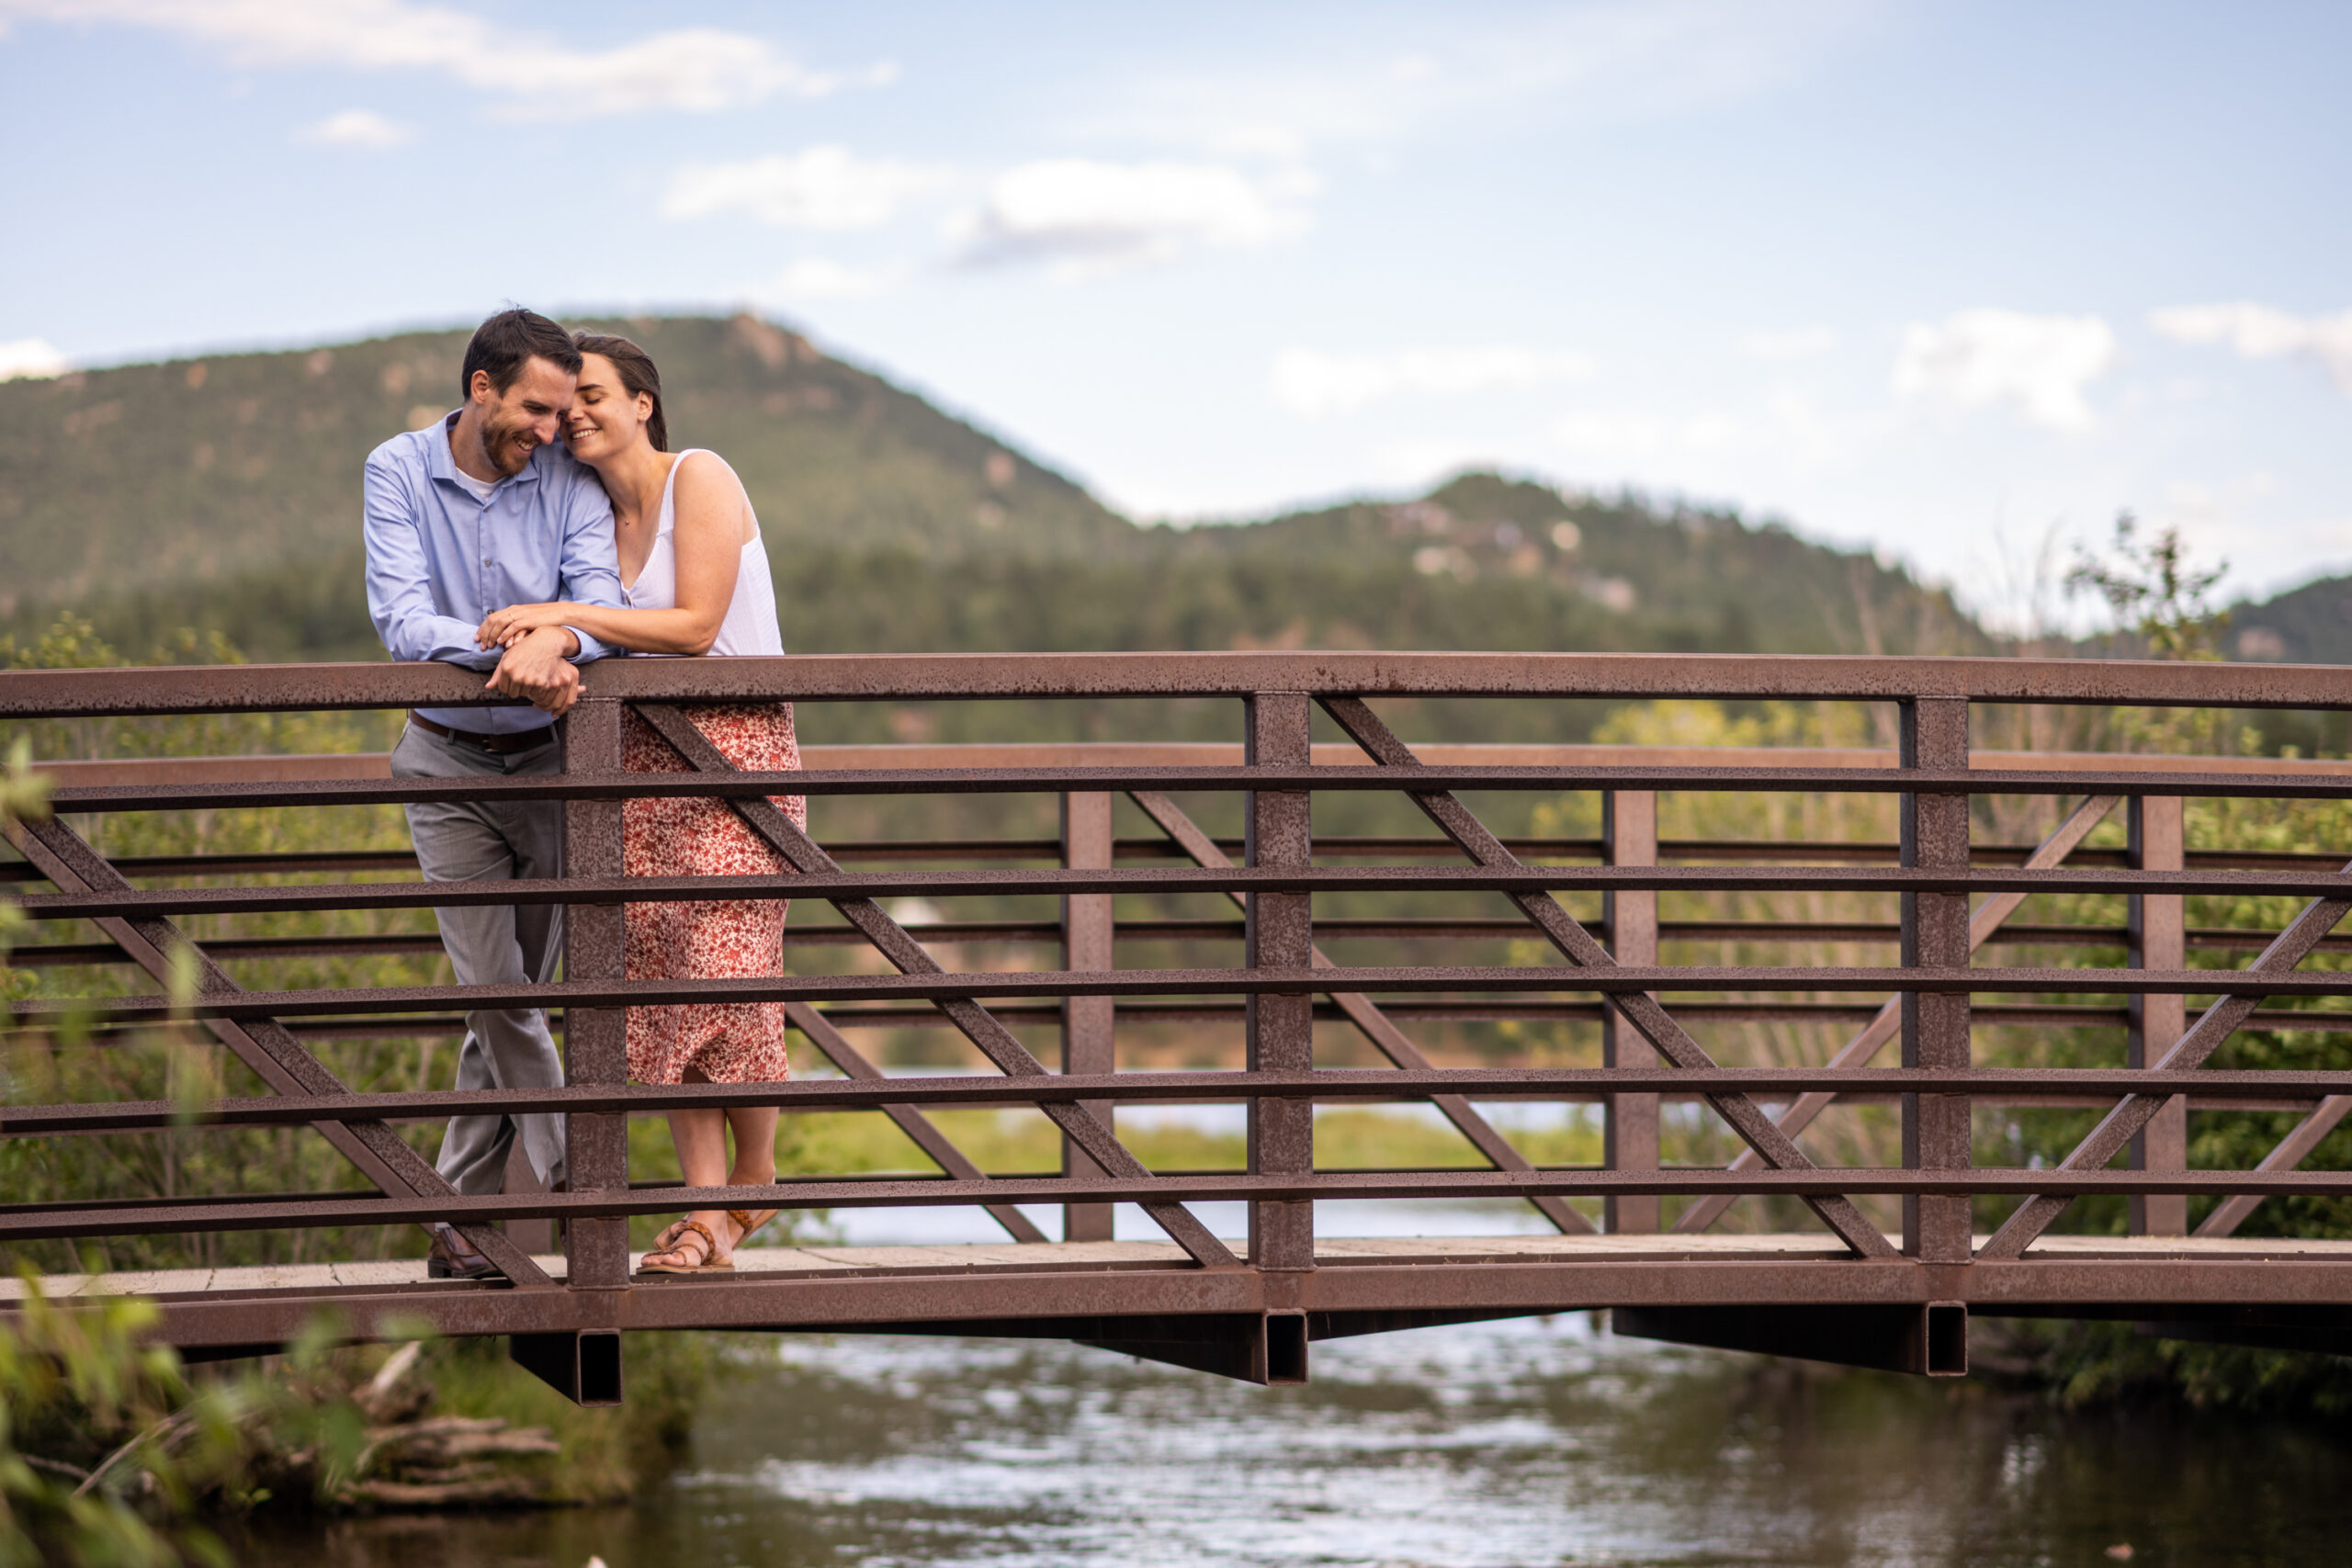 Alice and Joe hug on a bridge during an engagement photo shoot at Evergreen Lake in Evergreen, Colorado.